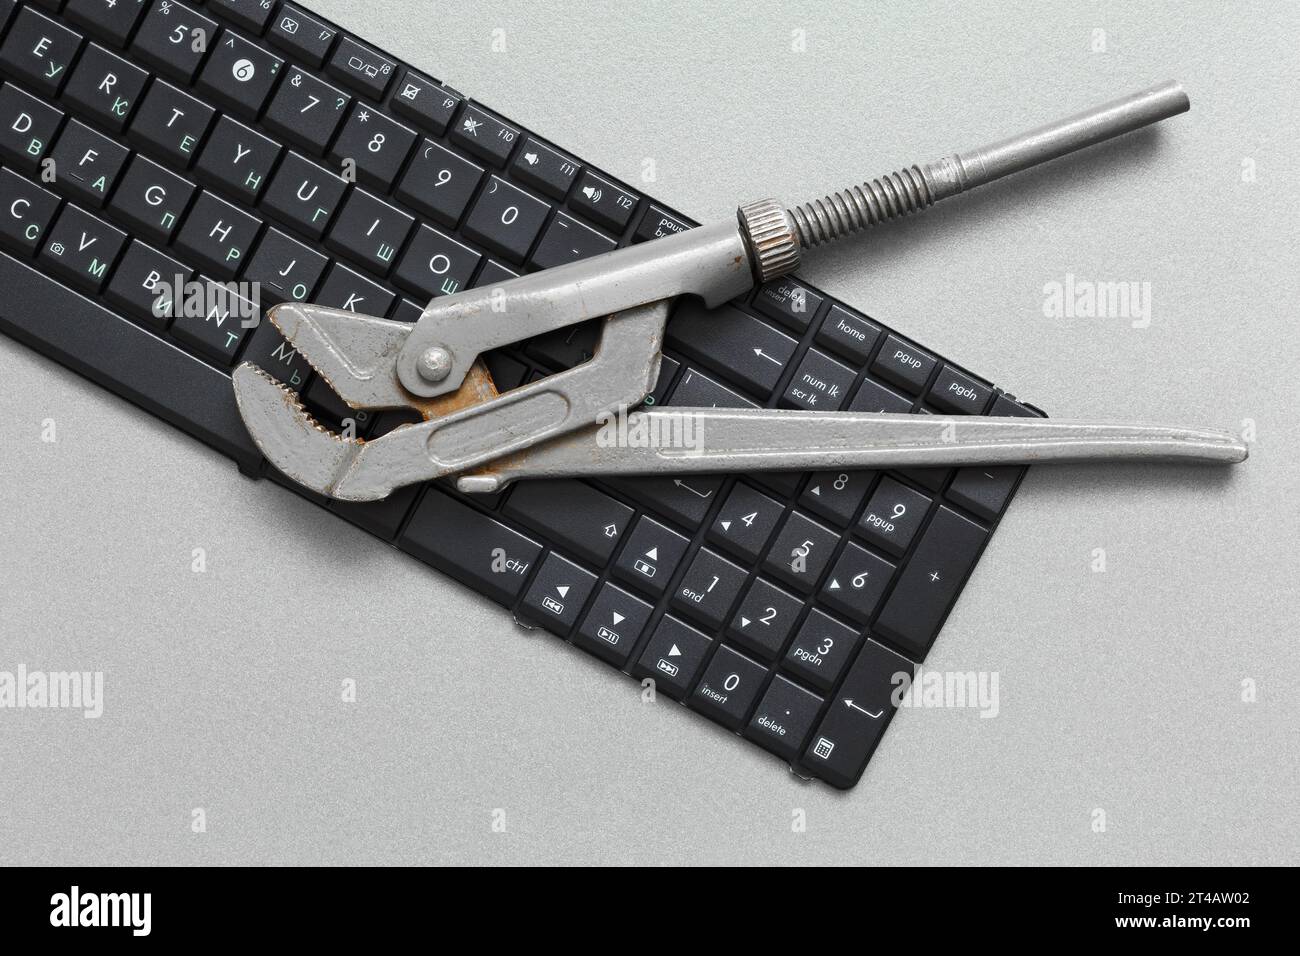 The adjustable wrench is on the keyboard. Concept for maintenance and repair of computer equipment. Stock Photo